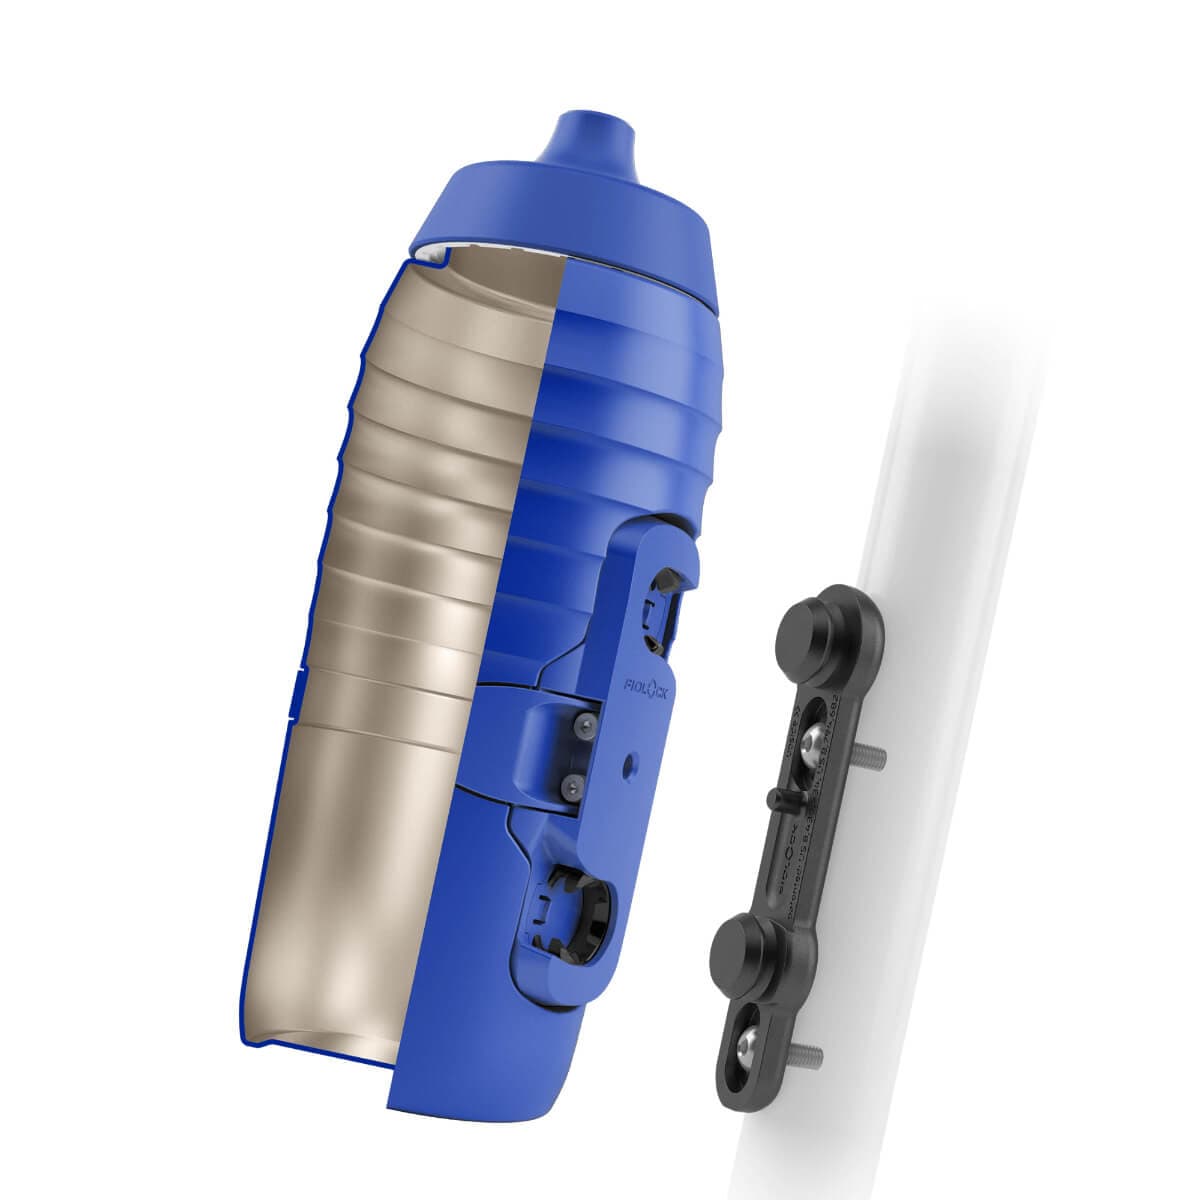 Cut of the blue bicycle bottle TWIST x KEEGO 0.6L with visible titanium interior and the FIDLOCK bottle cage